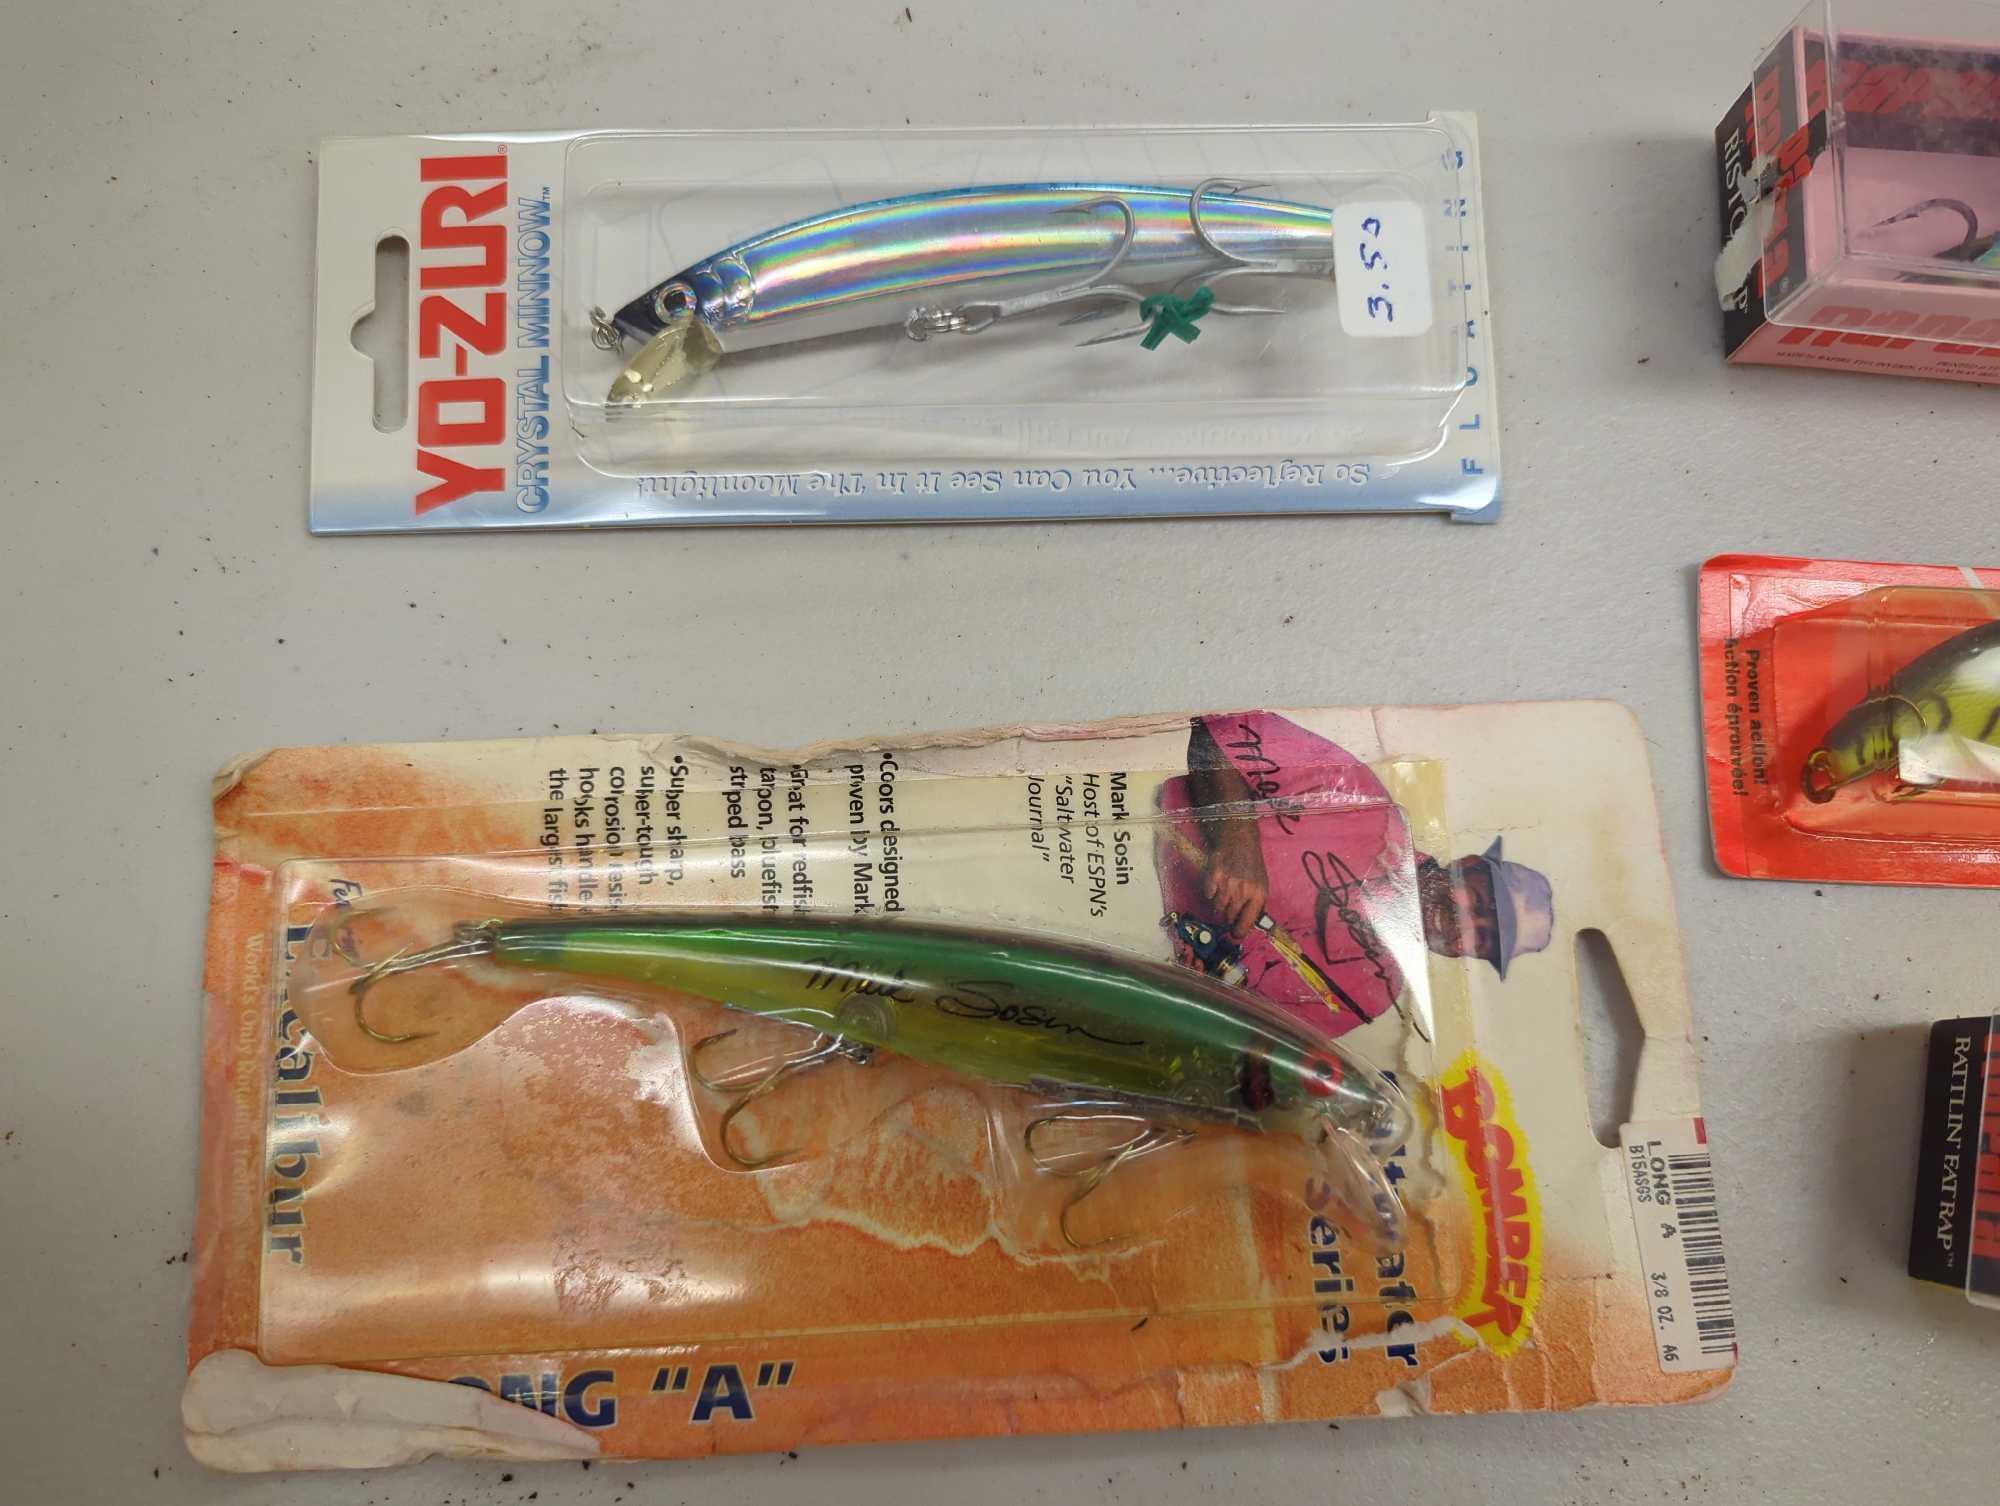 Clear organizer tote and contents including various fishing lures and other fishing accessories.